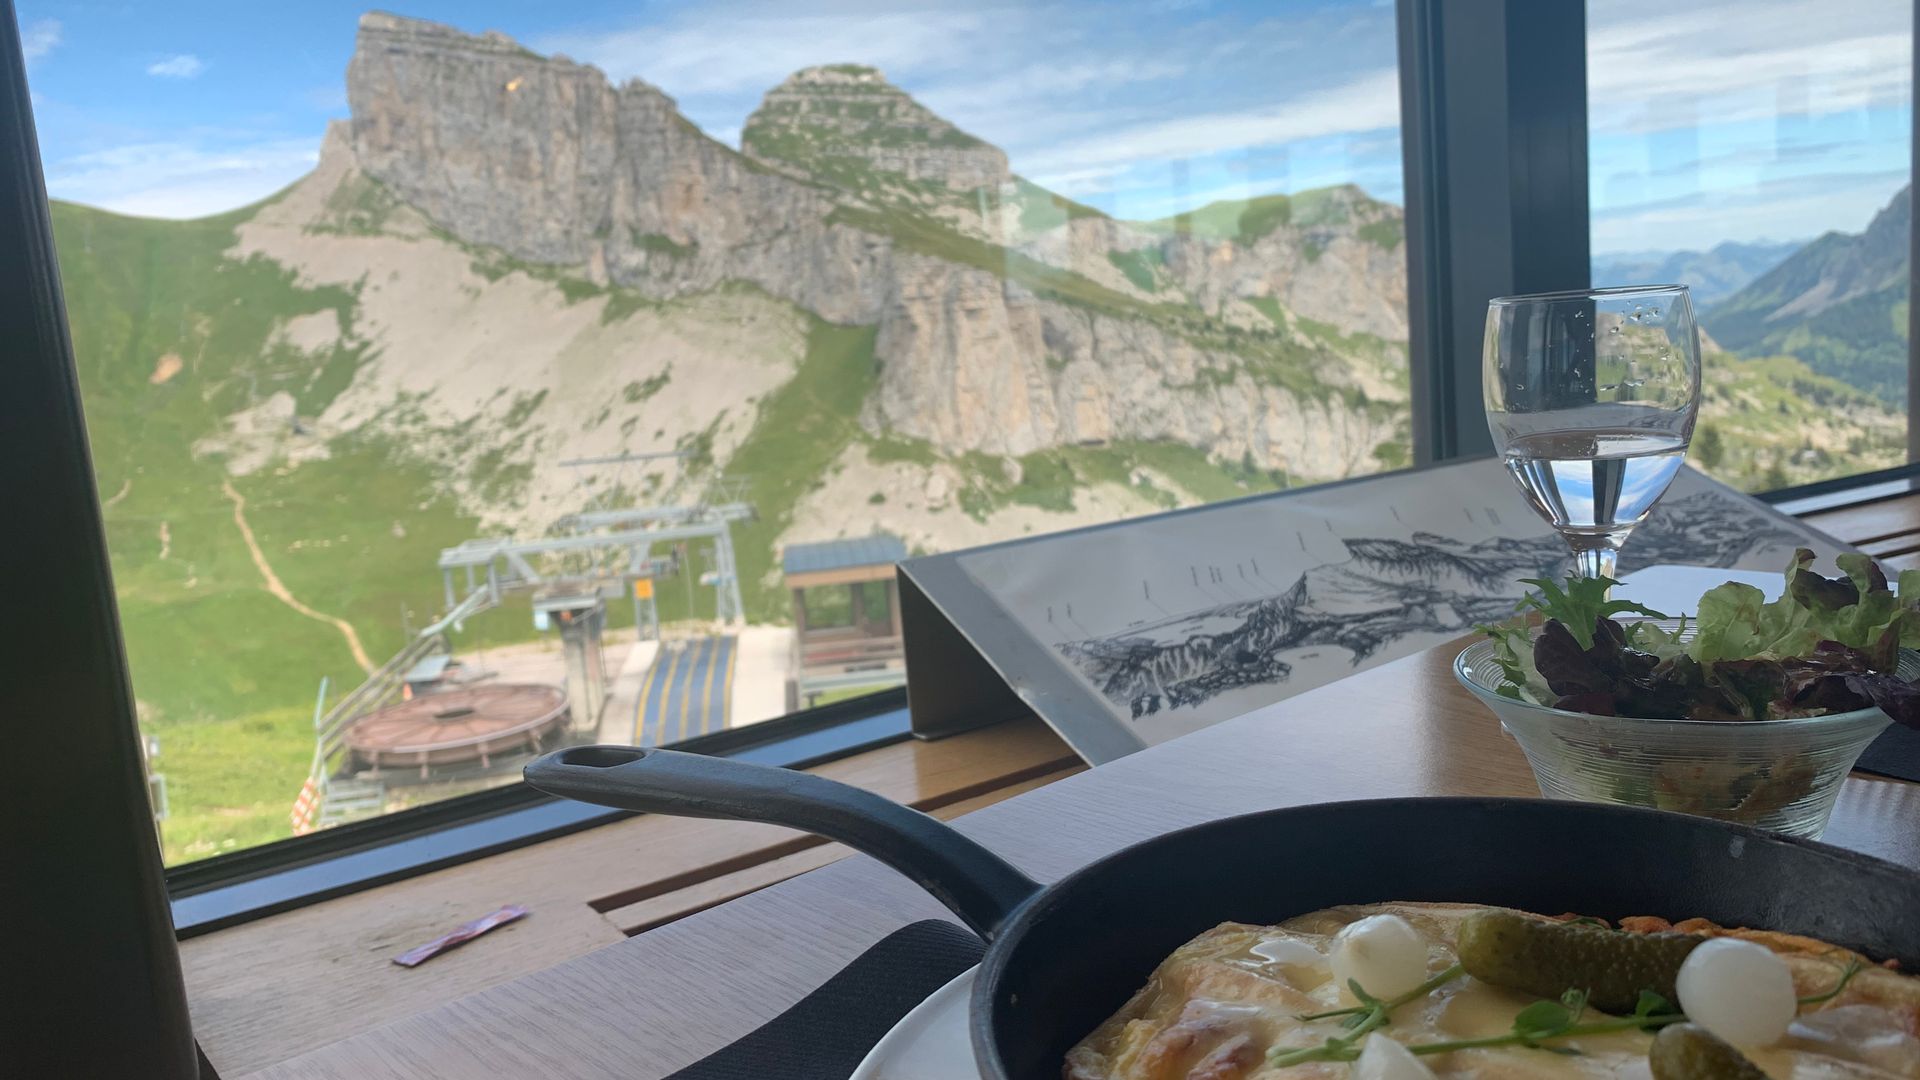 Meal with a view - Kuklos - Leysin